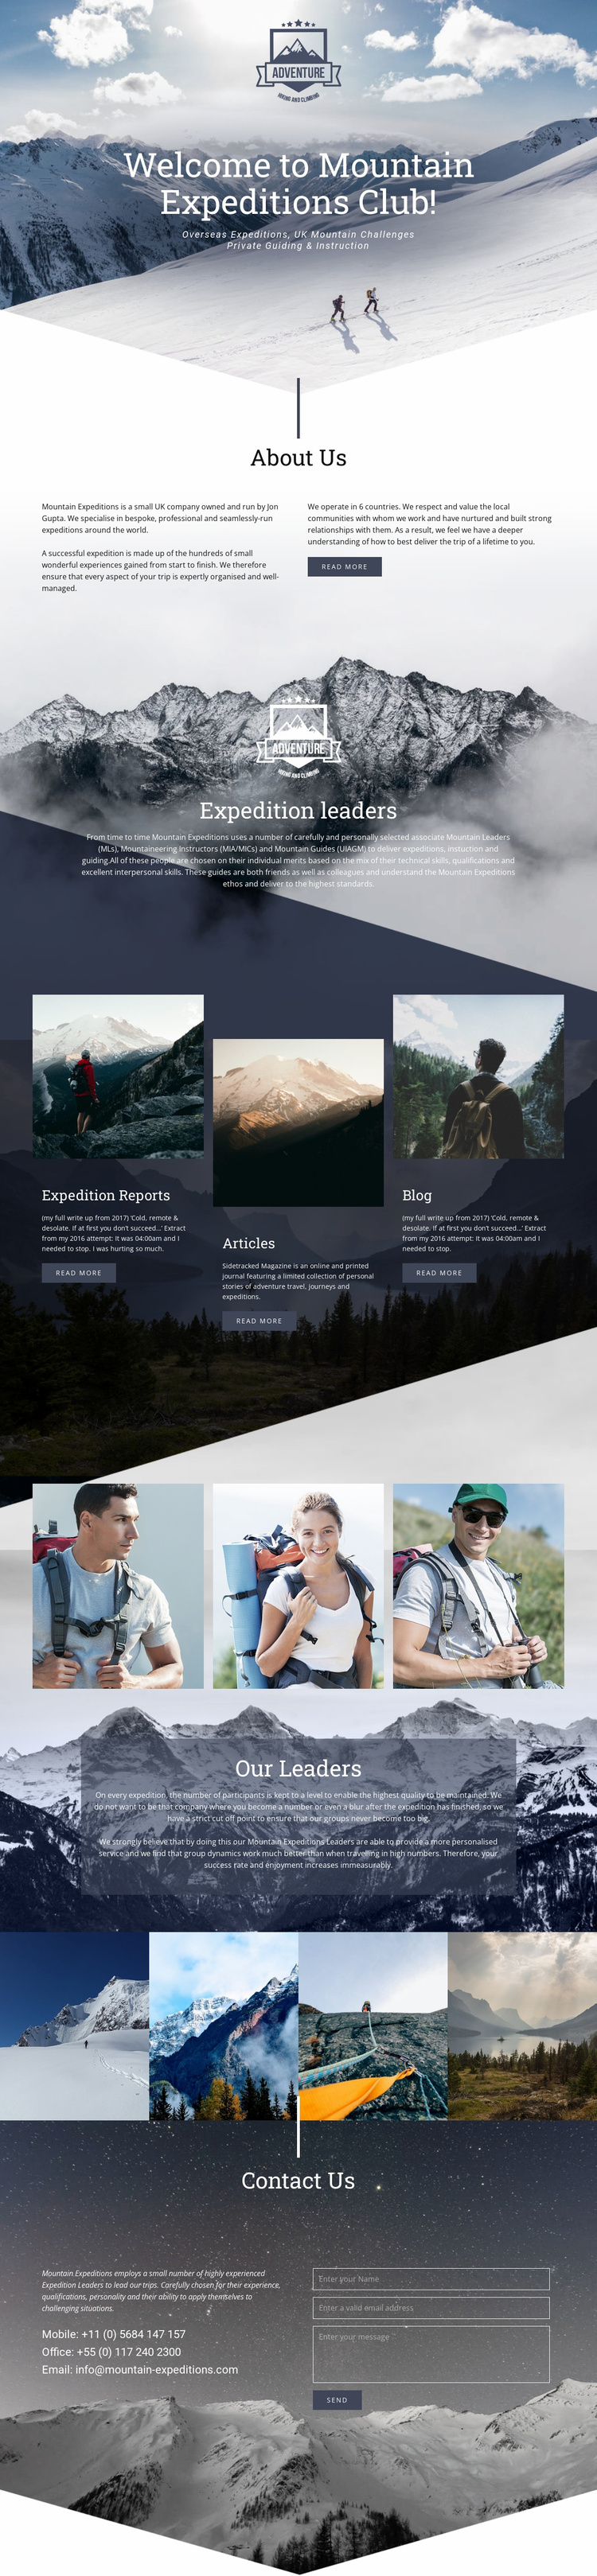 Extreme mountain expedition eCommerce Website Design